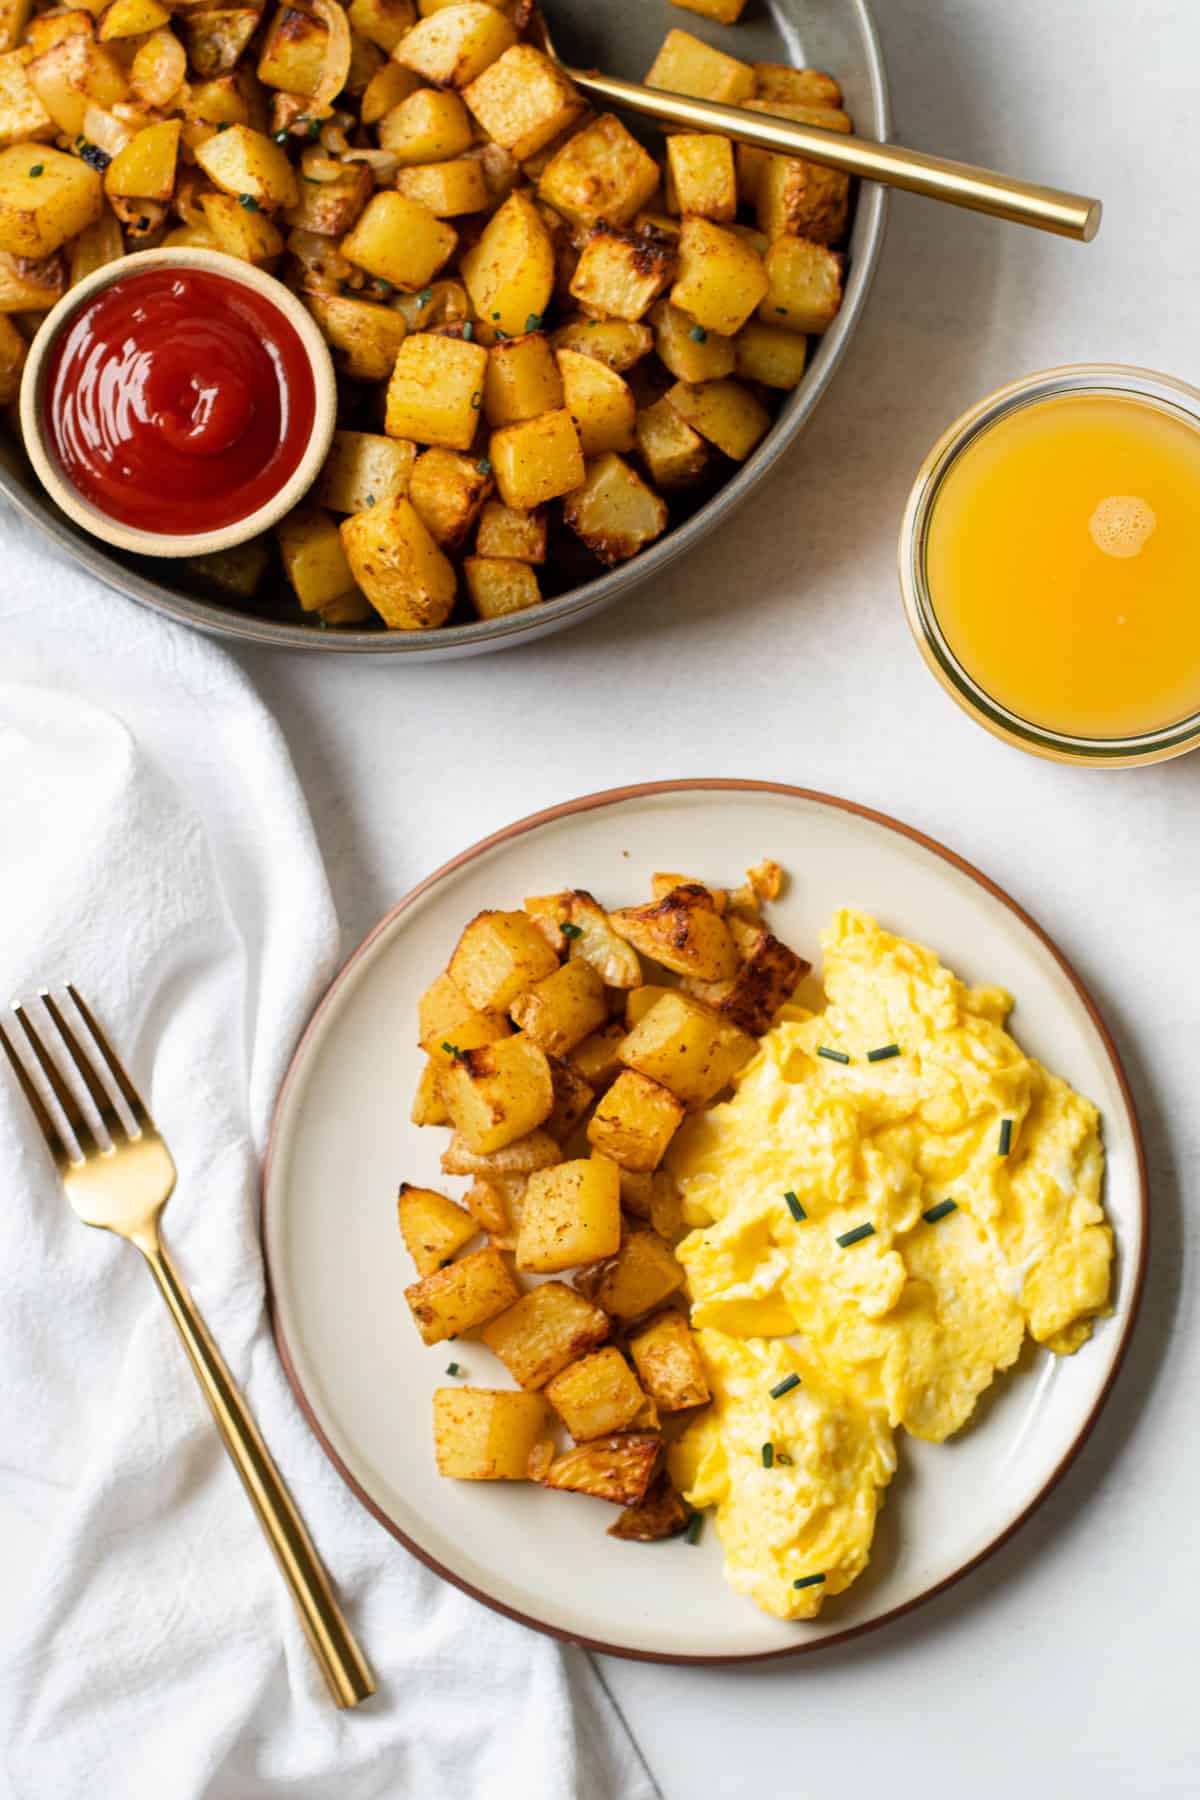 Breakfast plates with air fried potatoes.